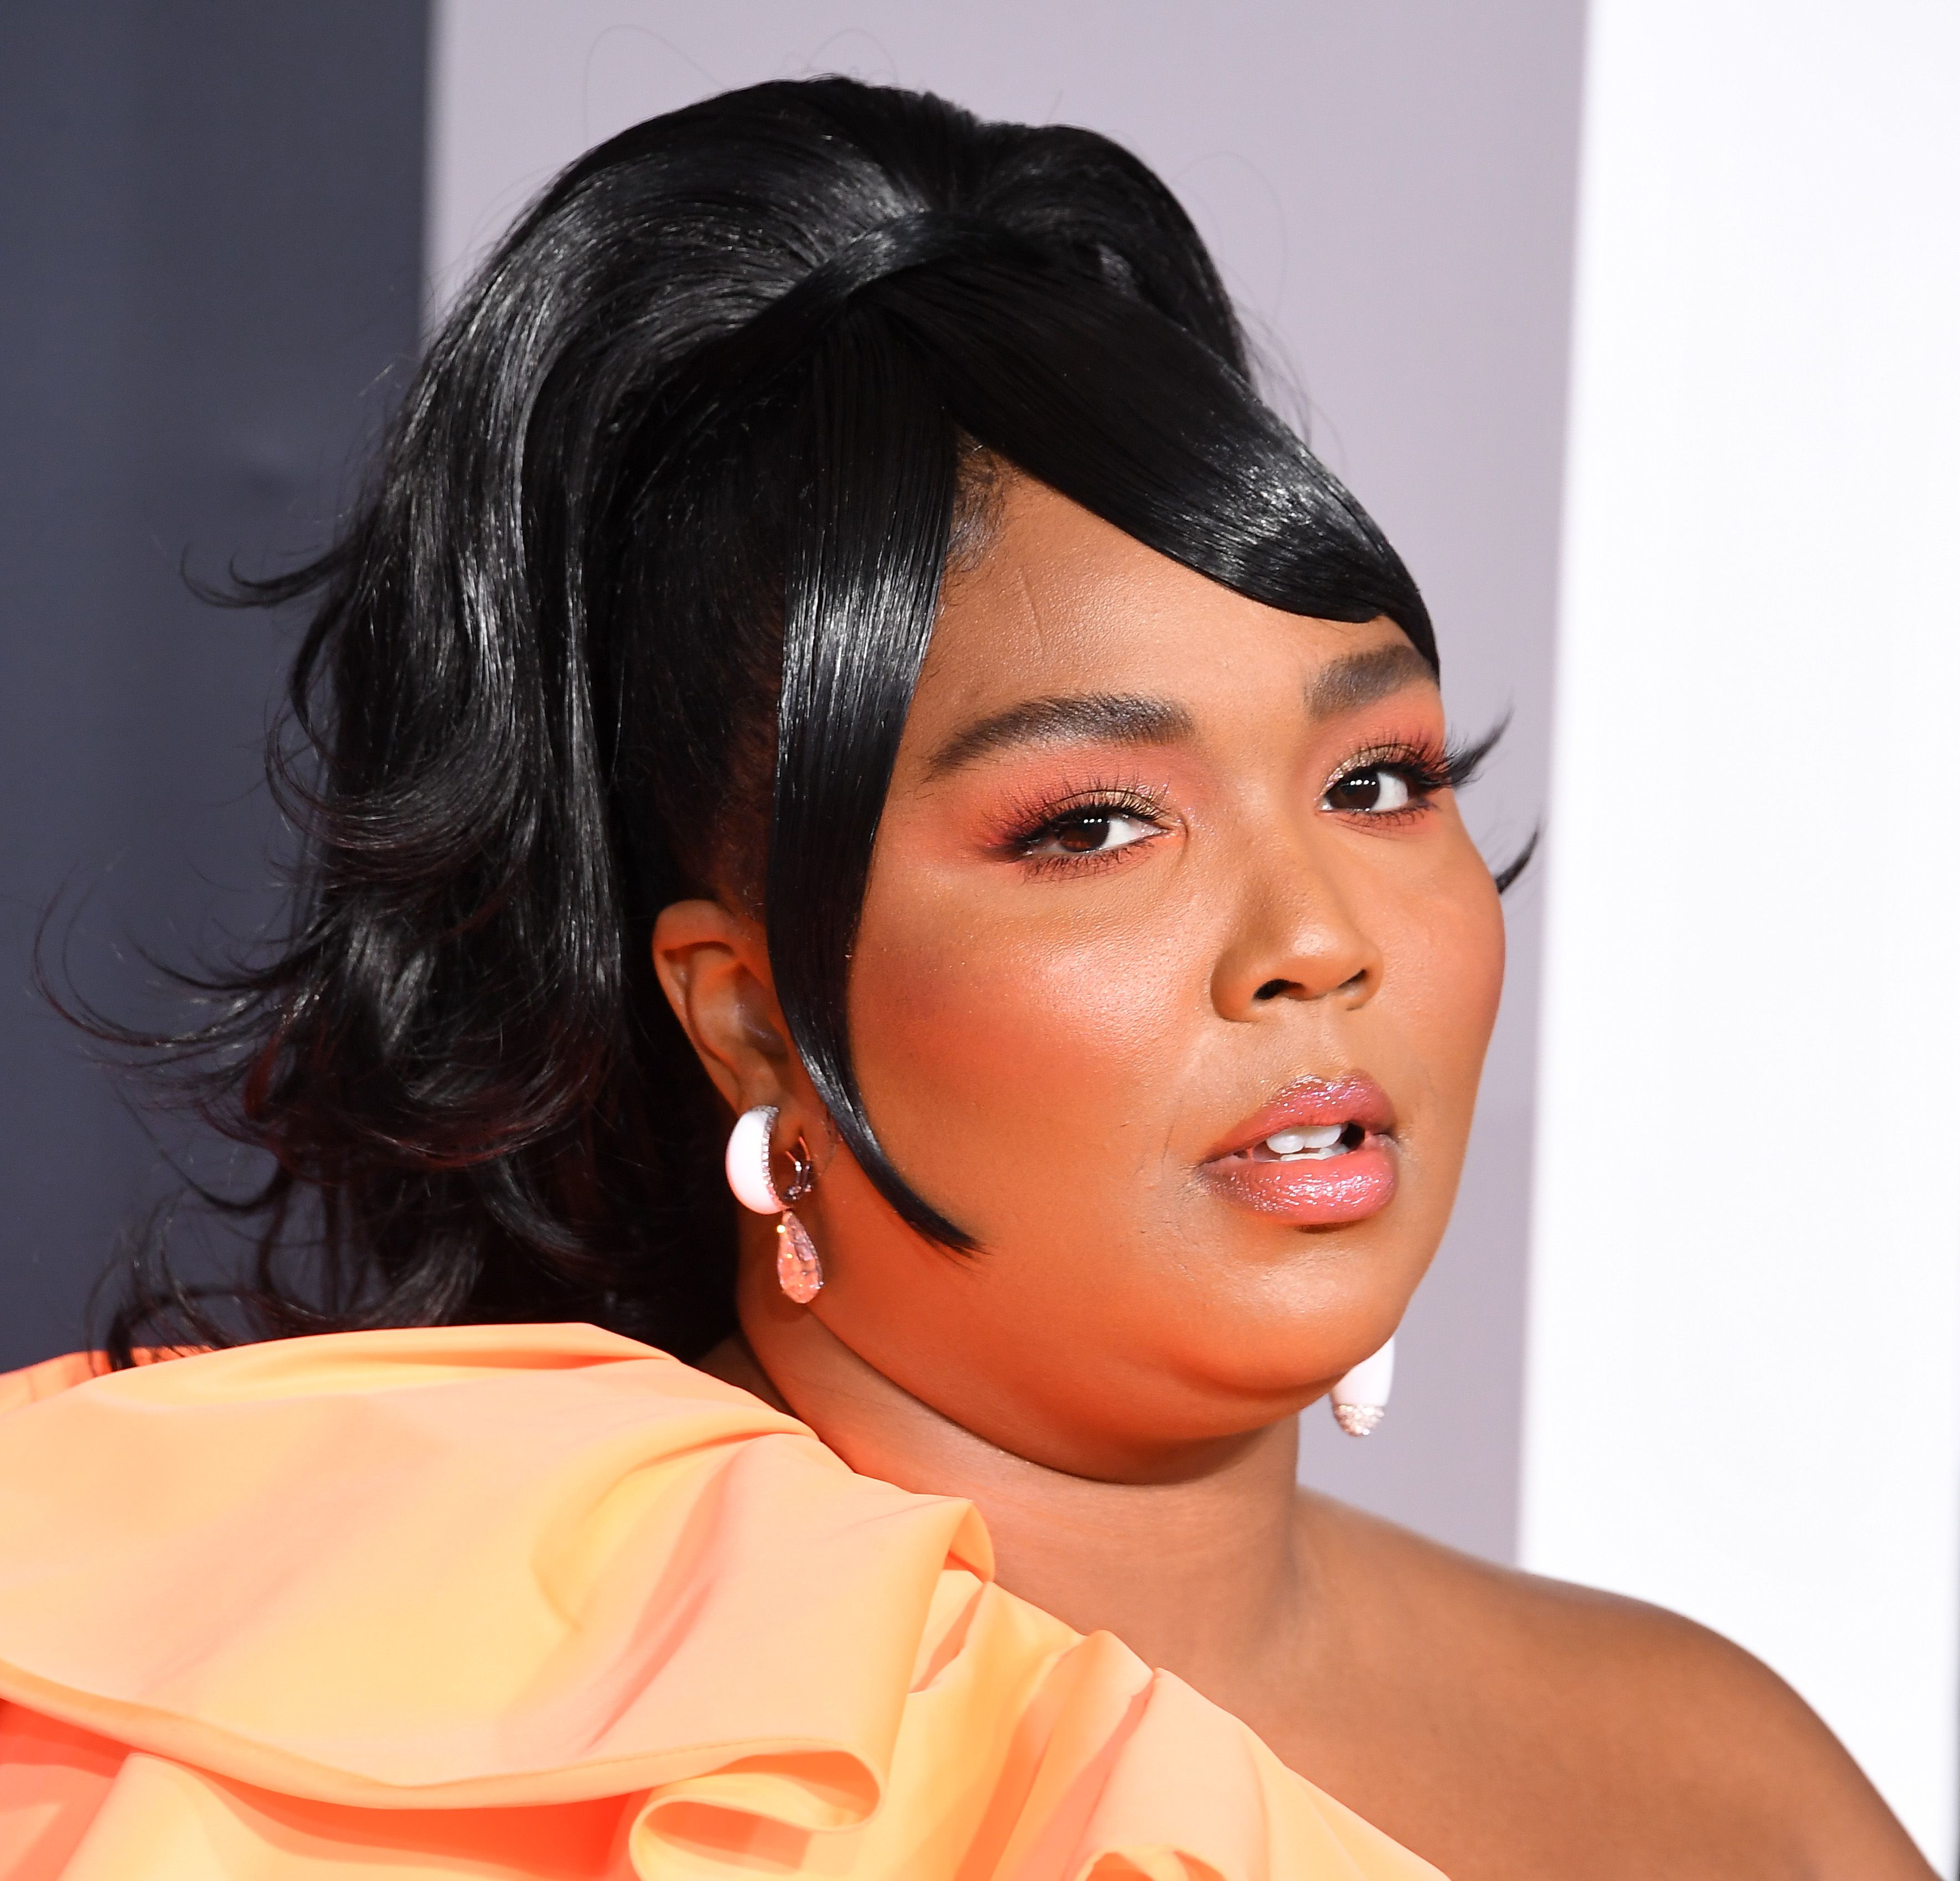 Lizzo's tiny Valentino purse is the real winner at the AMAs - PopBuzz